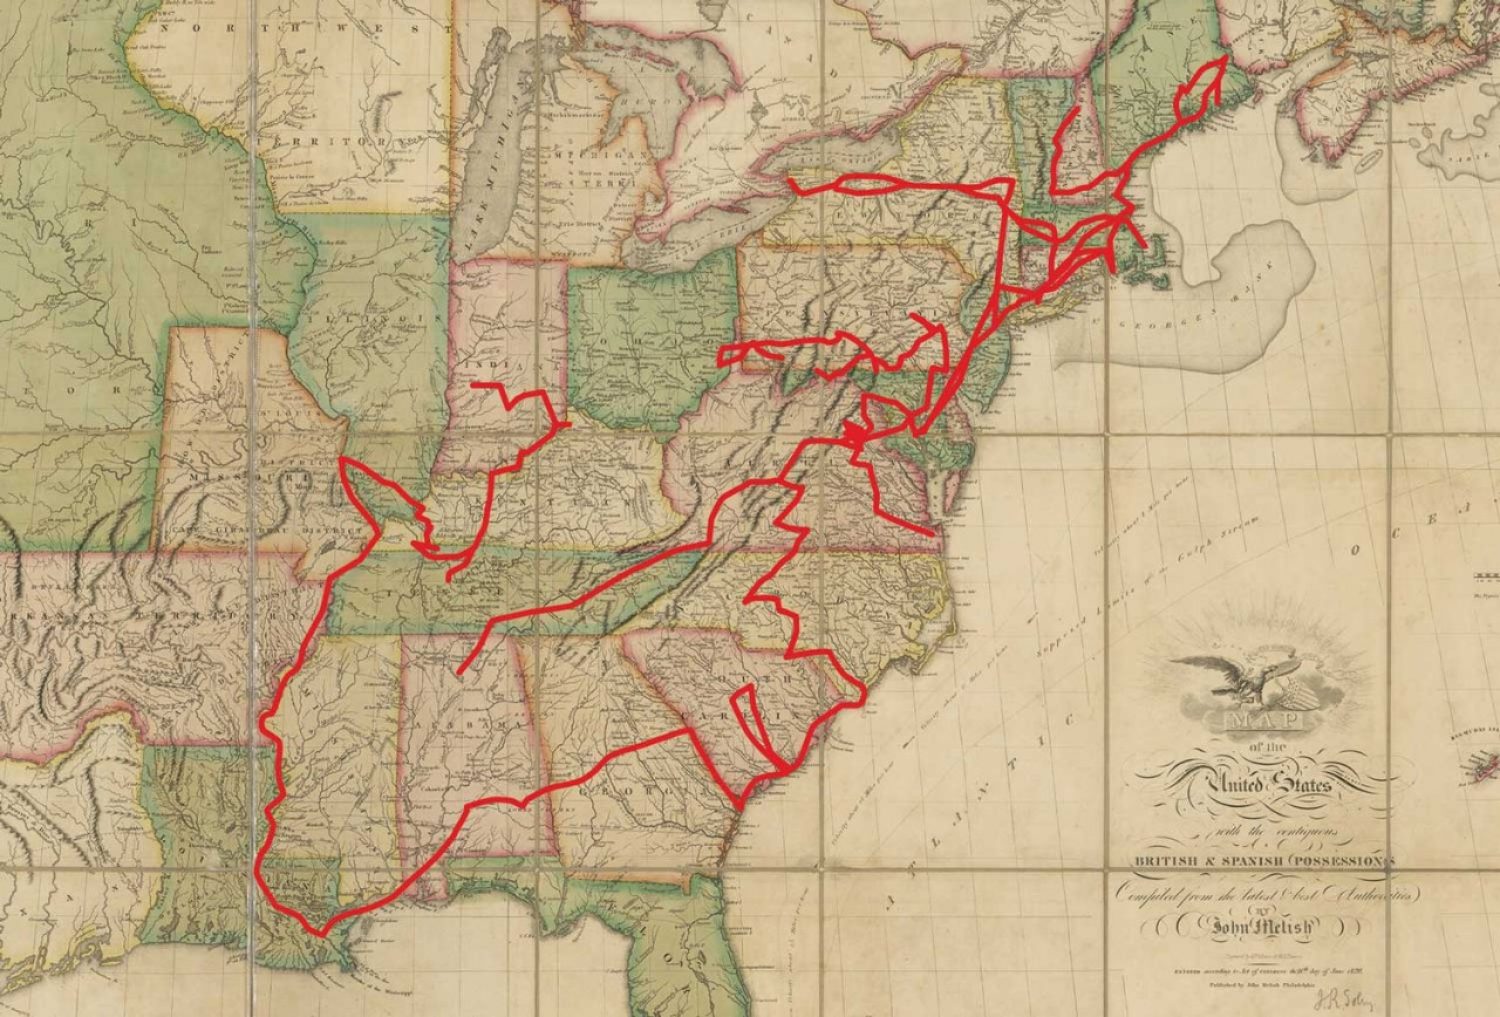 Early 19th Century United States map with lines marking Routes that writer Anne Royall traveled on U.S. Postal Service stagecoaches